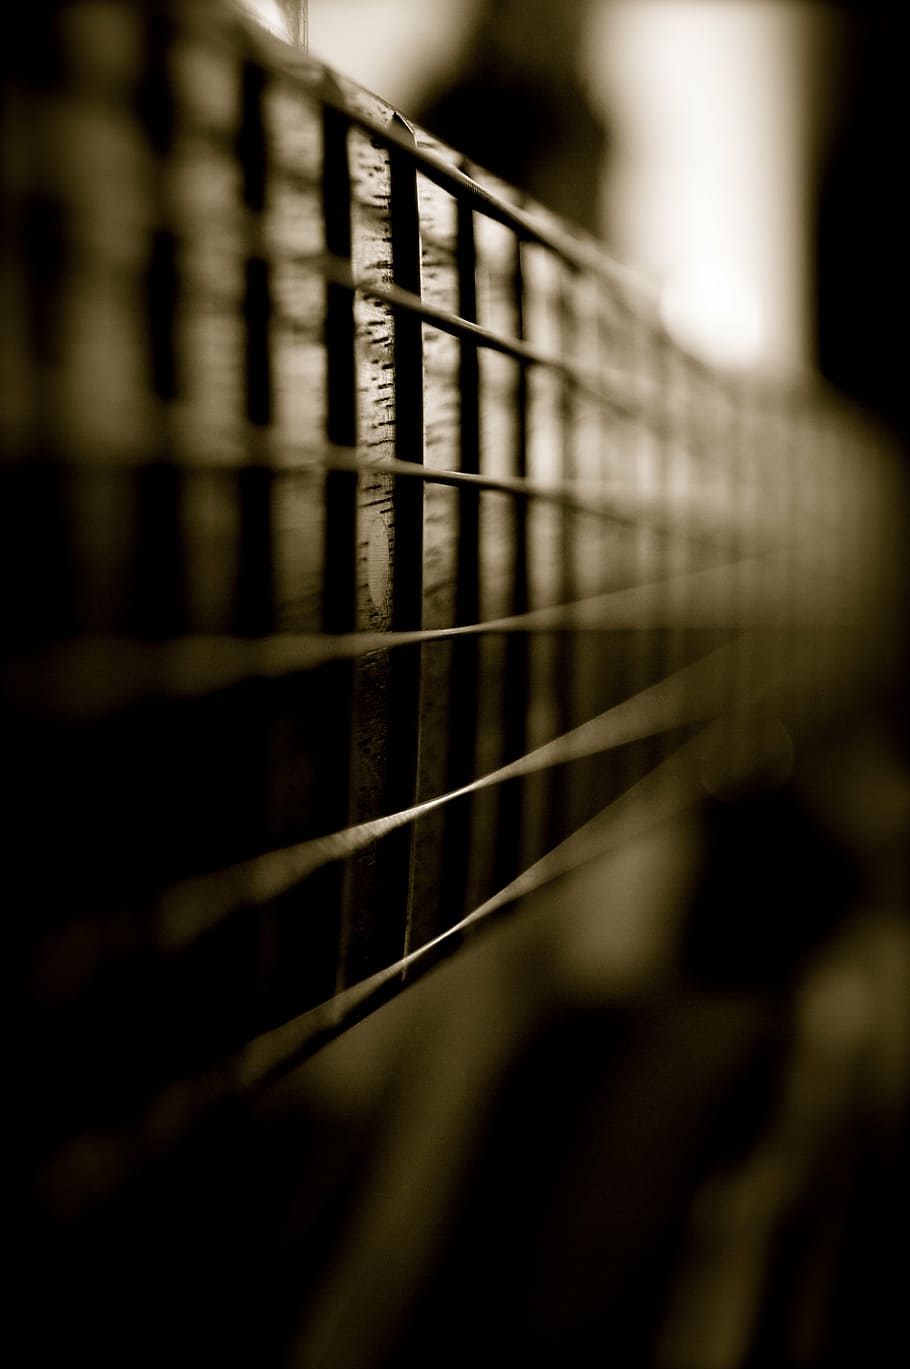 close-up photography, 6-string, 6- string guitar, guitar, instrument, strings, sound, music, black, white